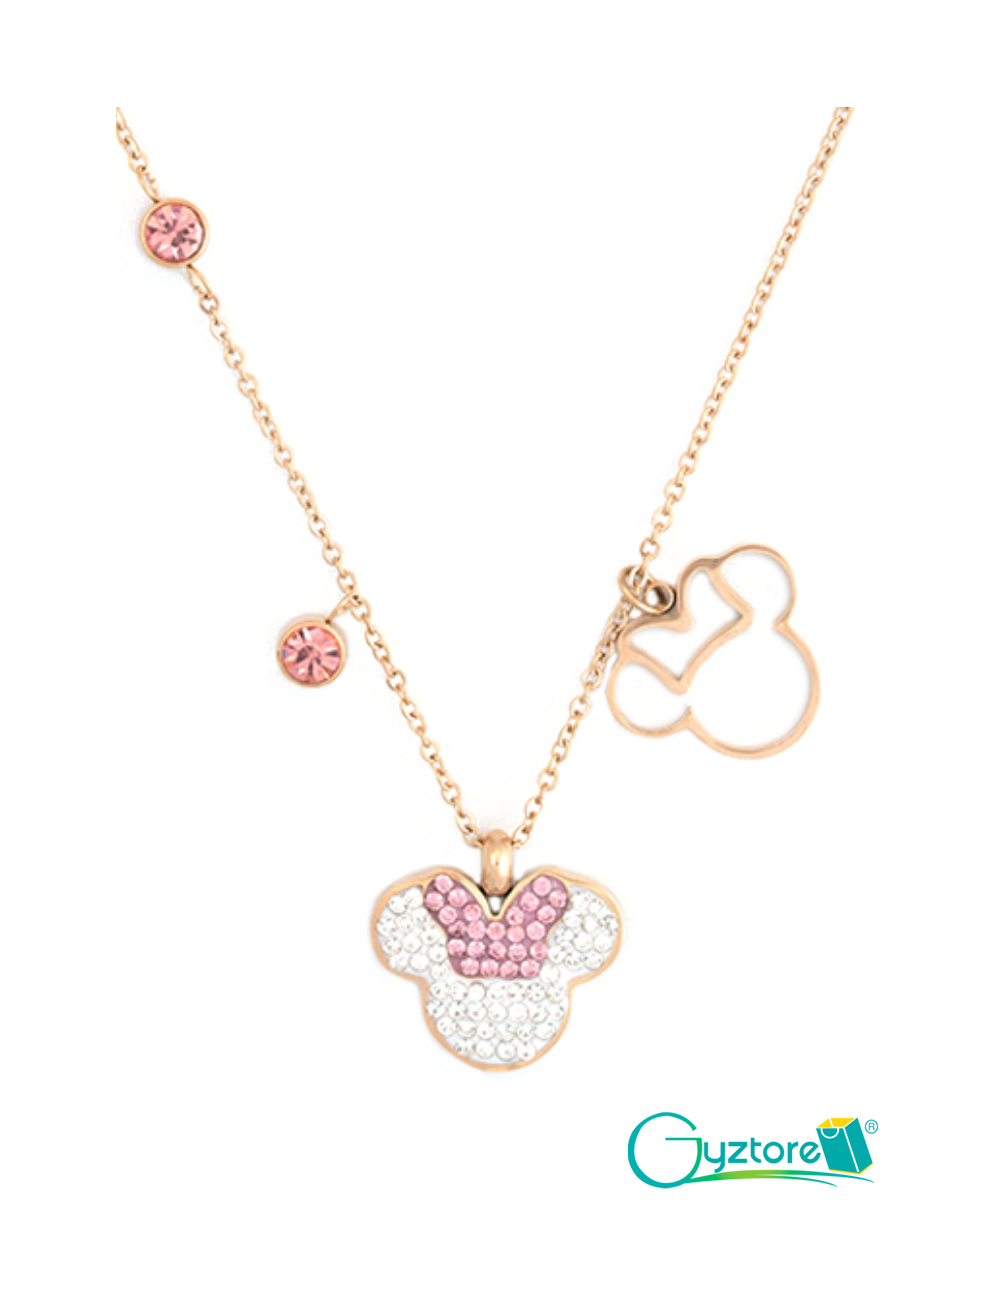 Collar acero inoxidable Minnie Mouse